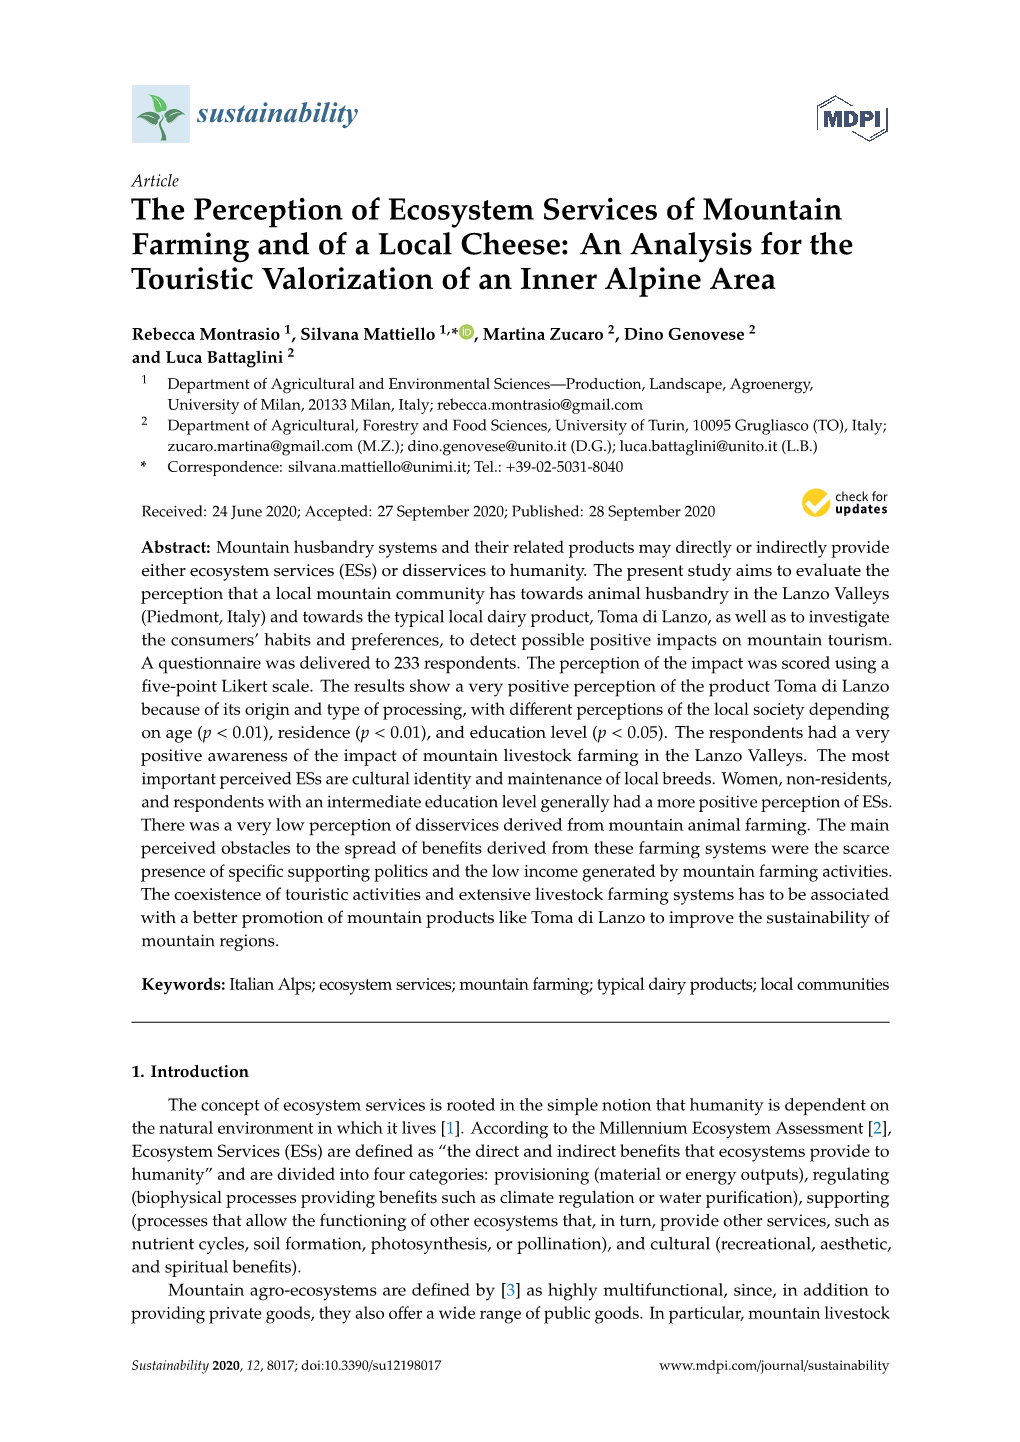 The Perception of Ecosystem Services of Mountain Farming and of a Local Cheese: an Analysis for the Touristic Valorization of an Inner Alpine Area